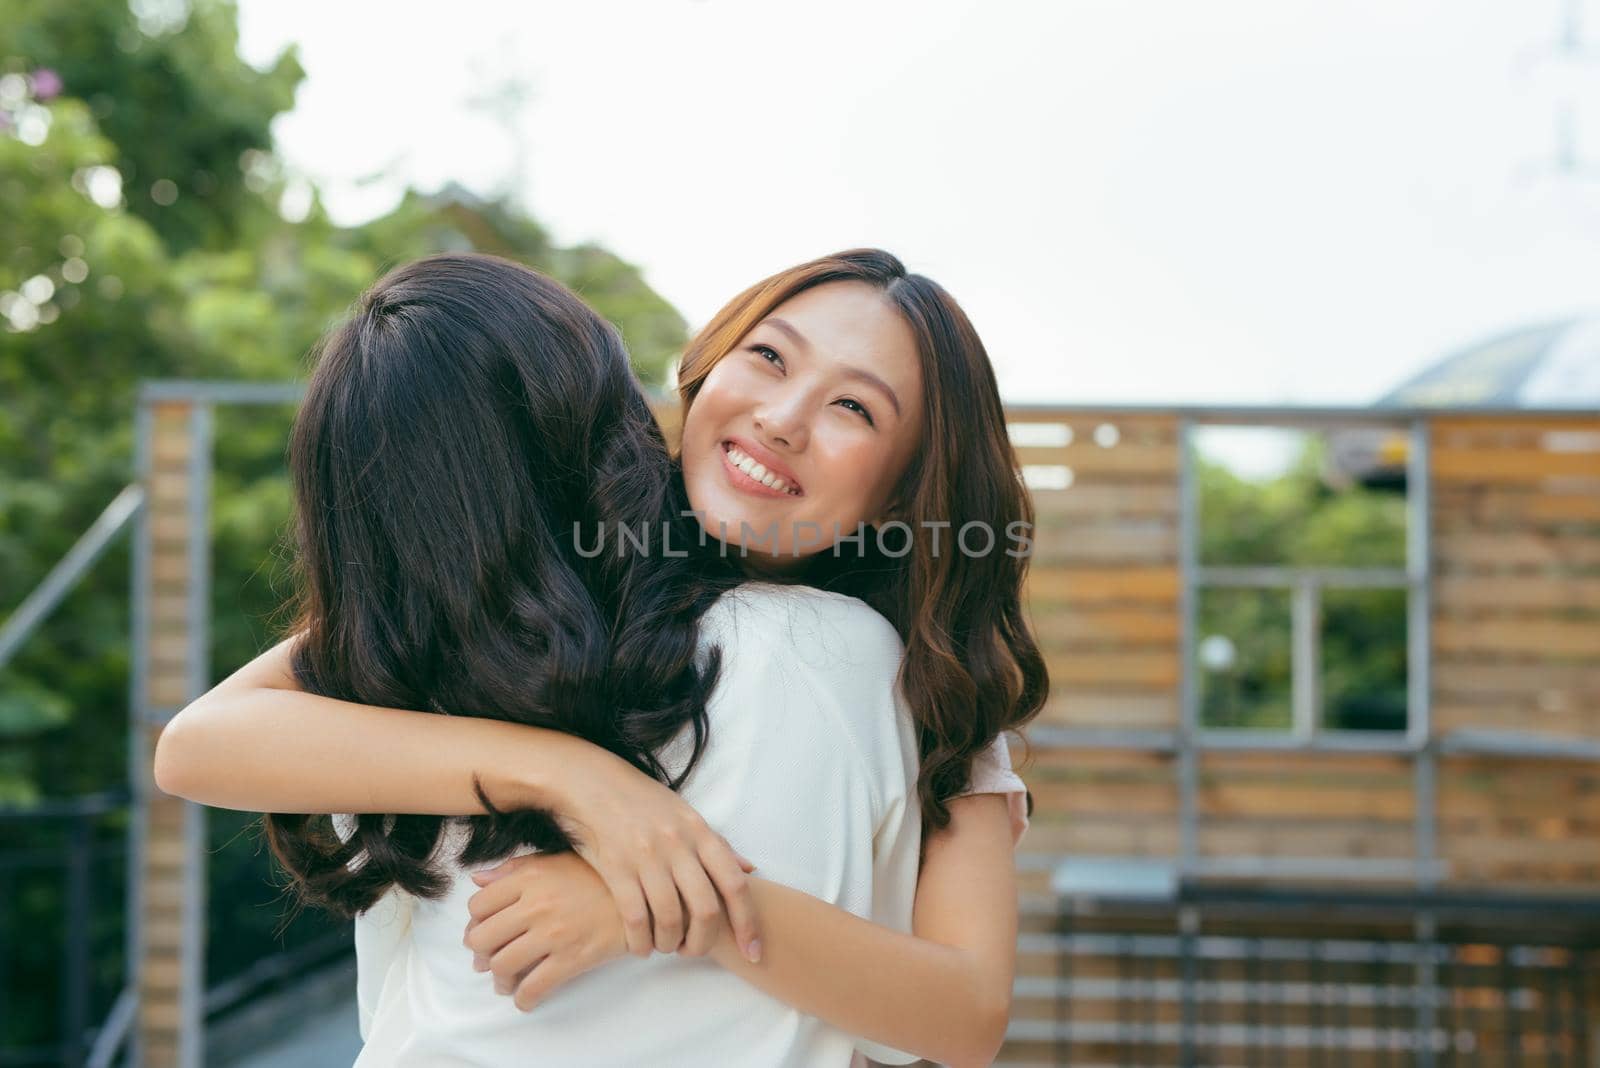 Beauties in style. Two beautiful young well-dressed women smiling at camera while standing embracing outdoors by makidotvn